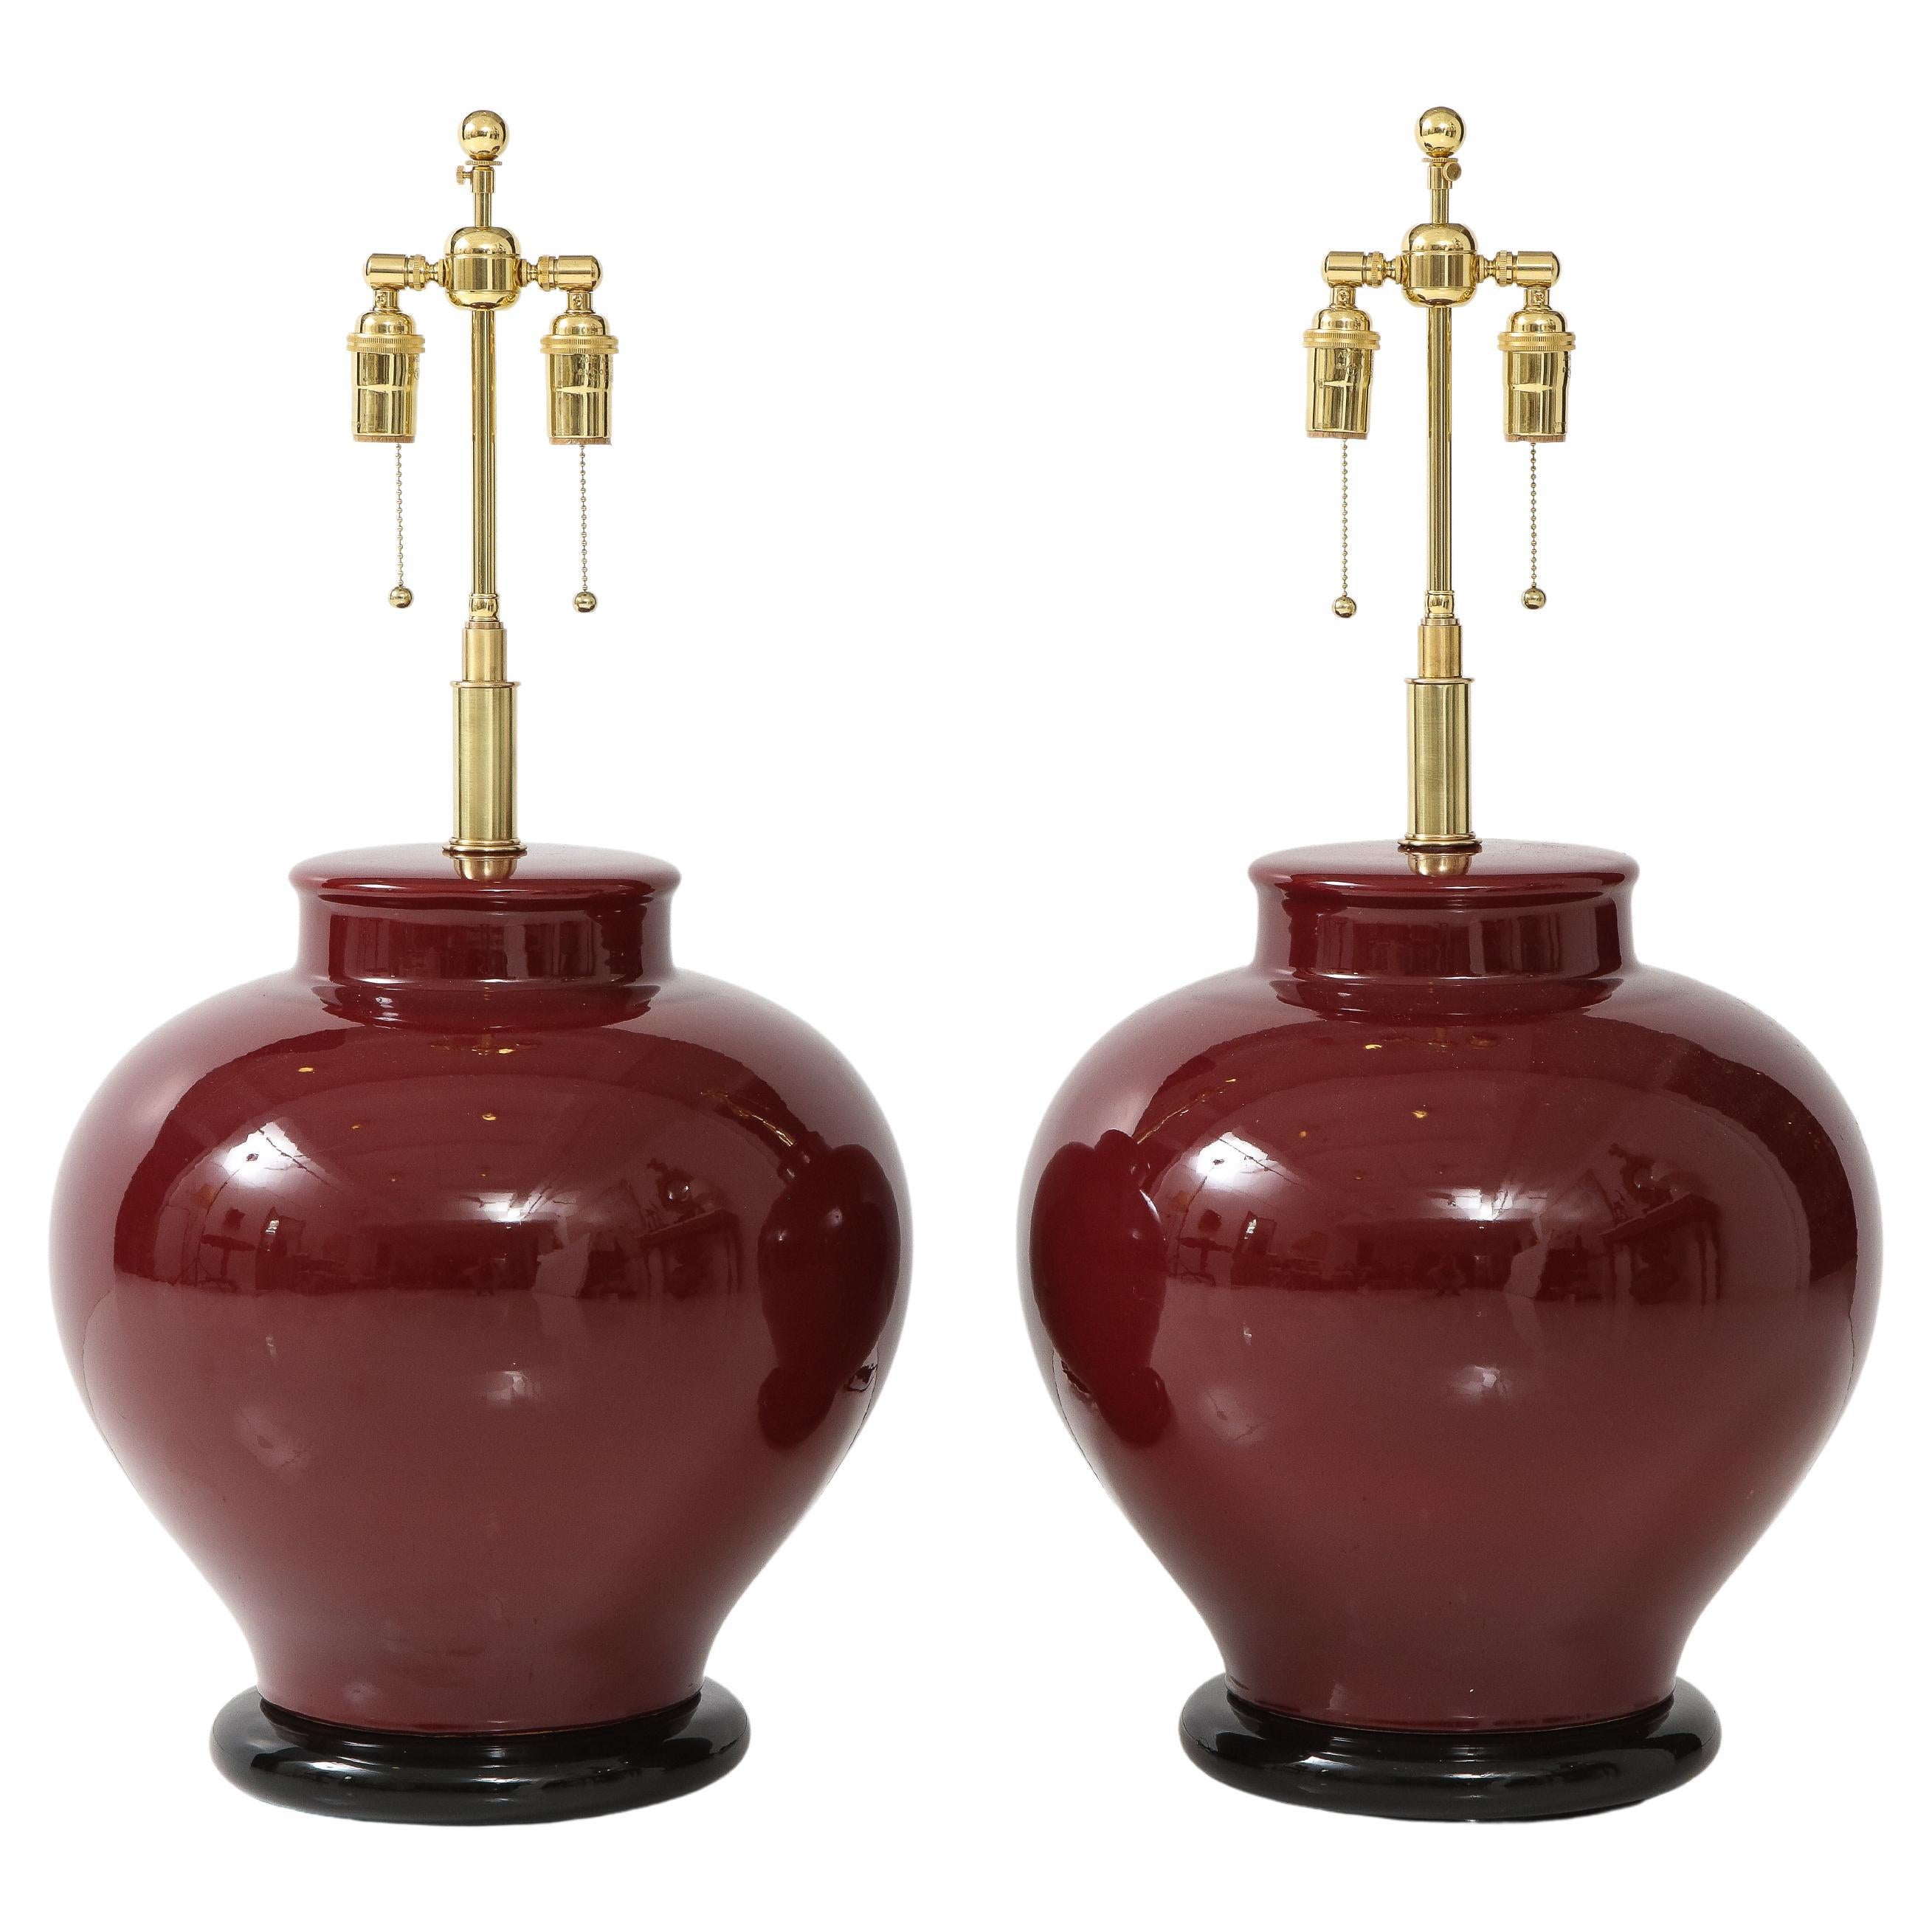 Pair of Large Ceramic Lamps with a Rich Burgundy Glaze Finish For Sale